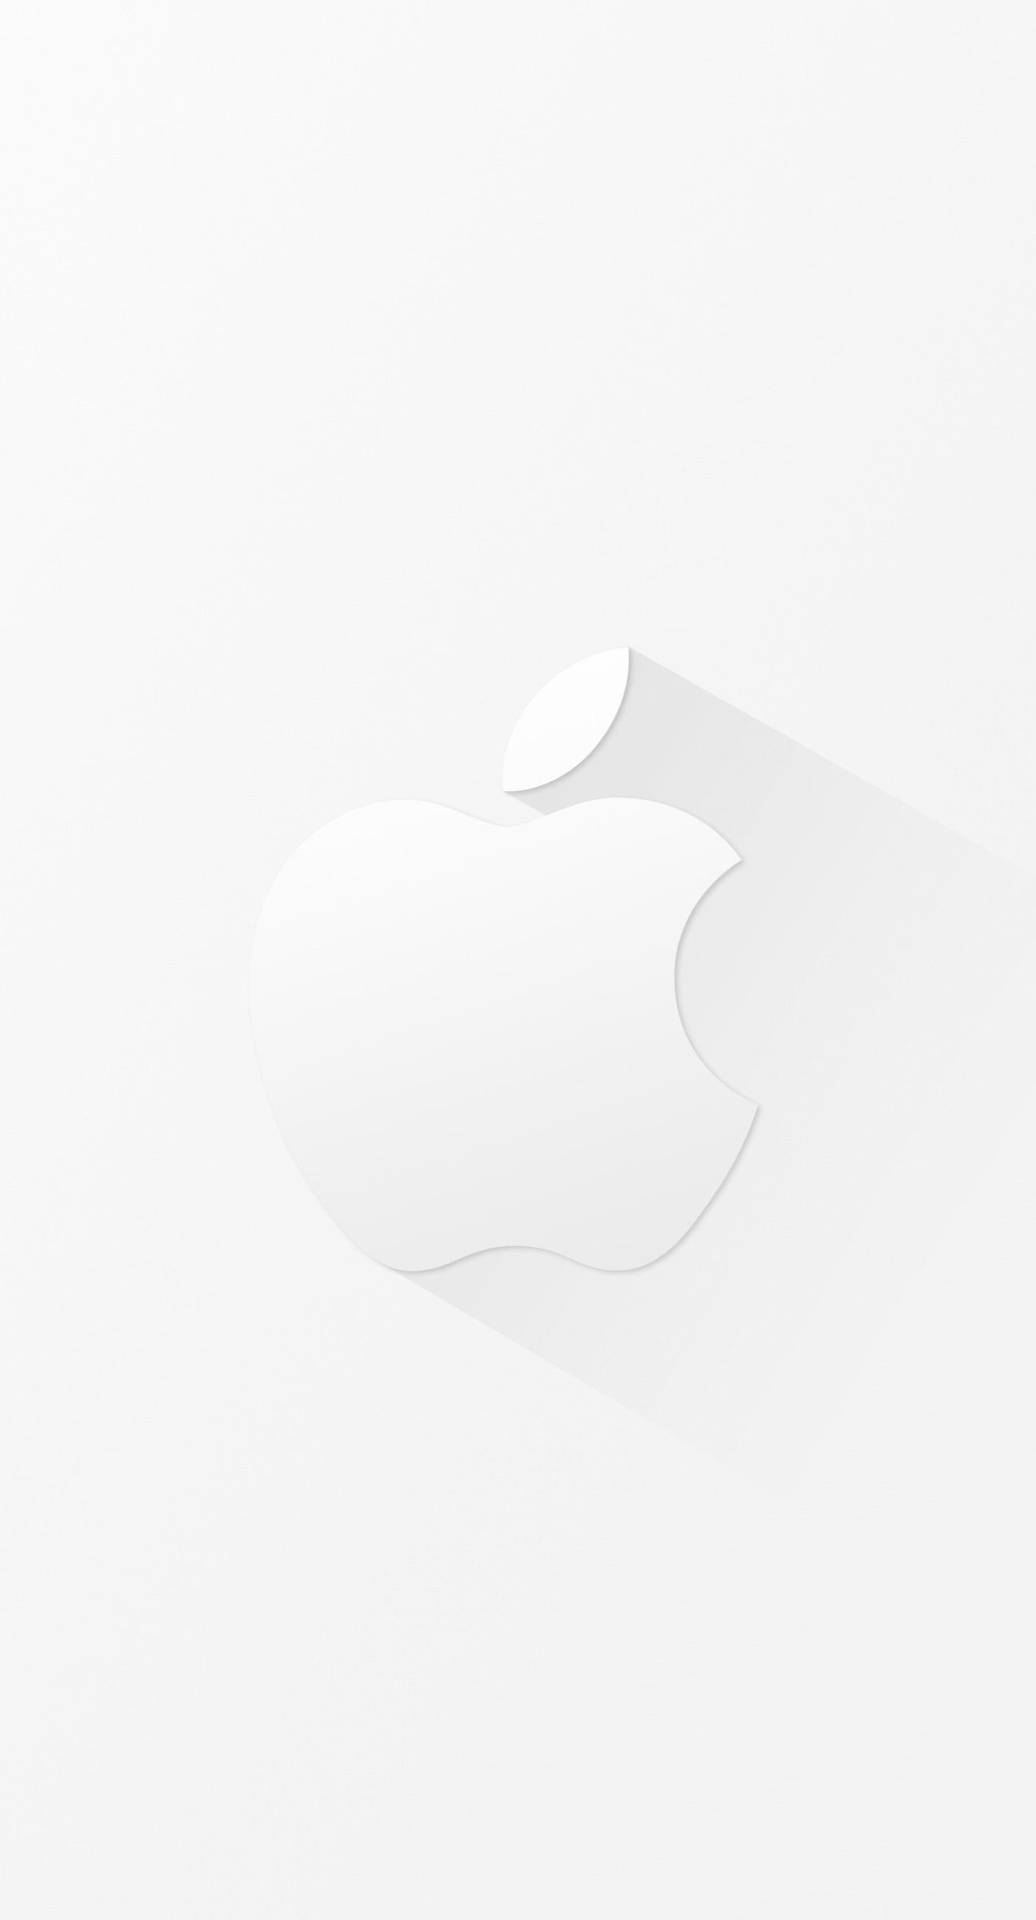 Cool Iphone White Minimalist Apple Logo Picture